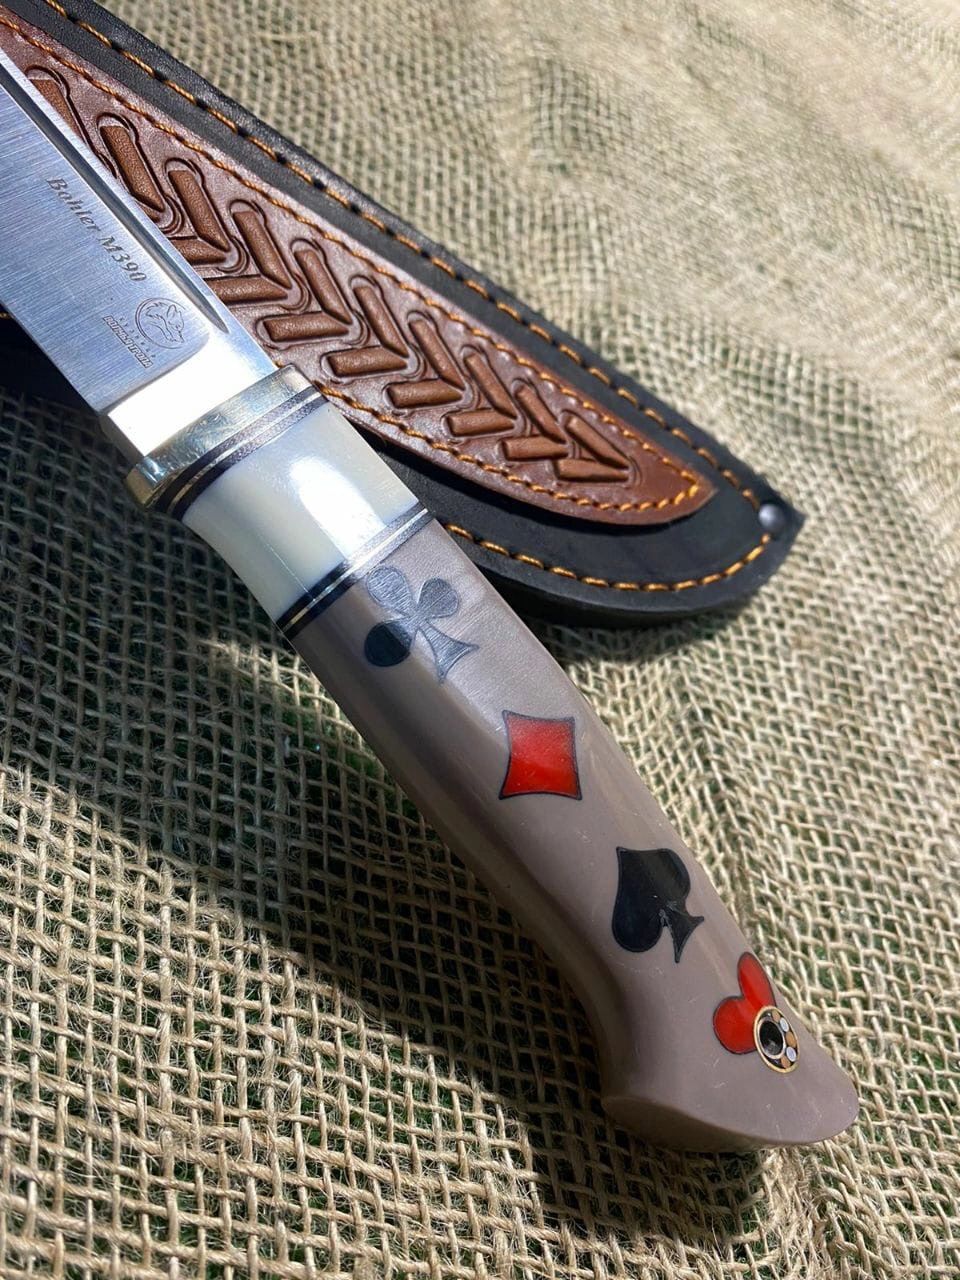 Hunting Knife with 3D Acrylic Handle with Mammoth Tooth